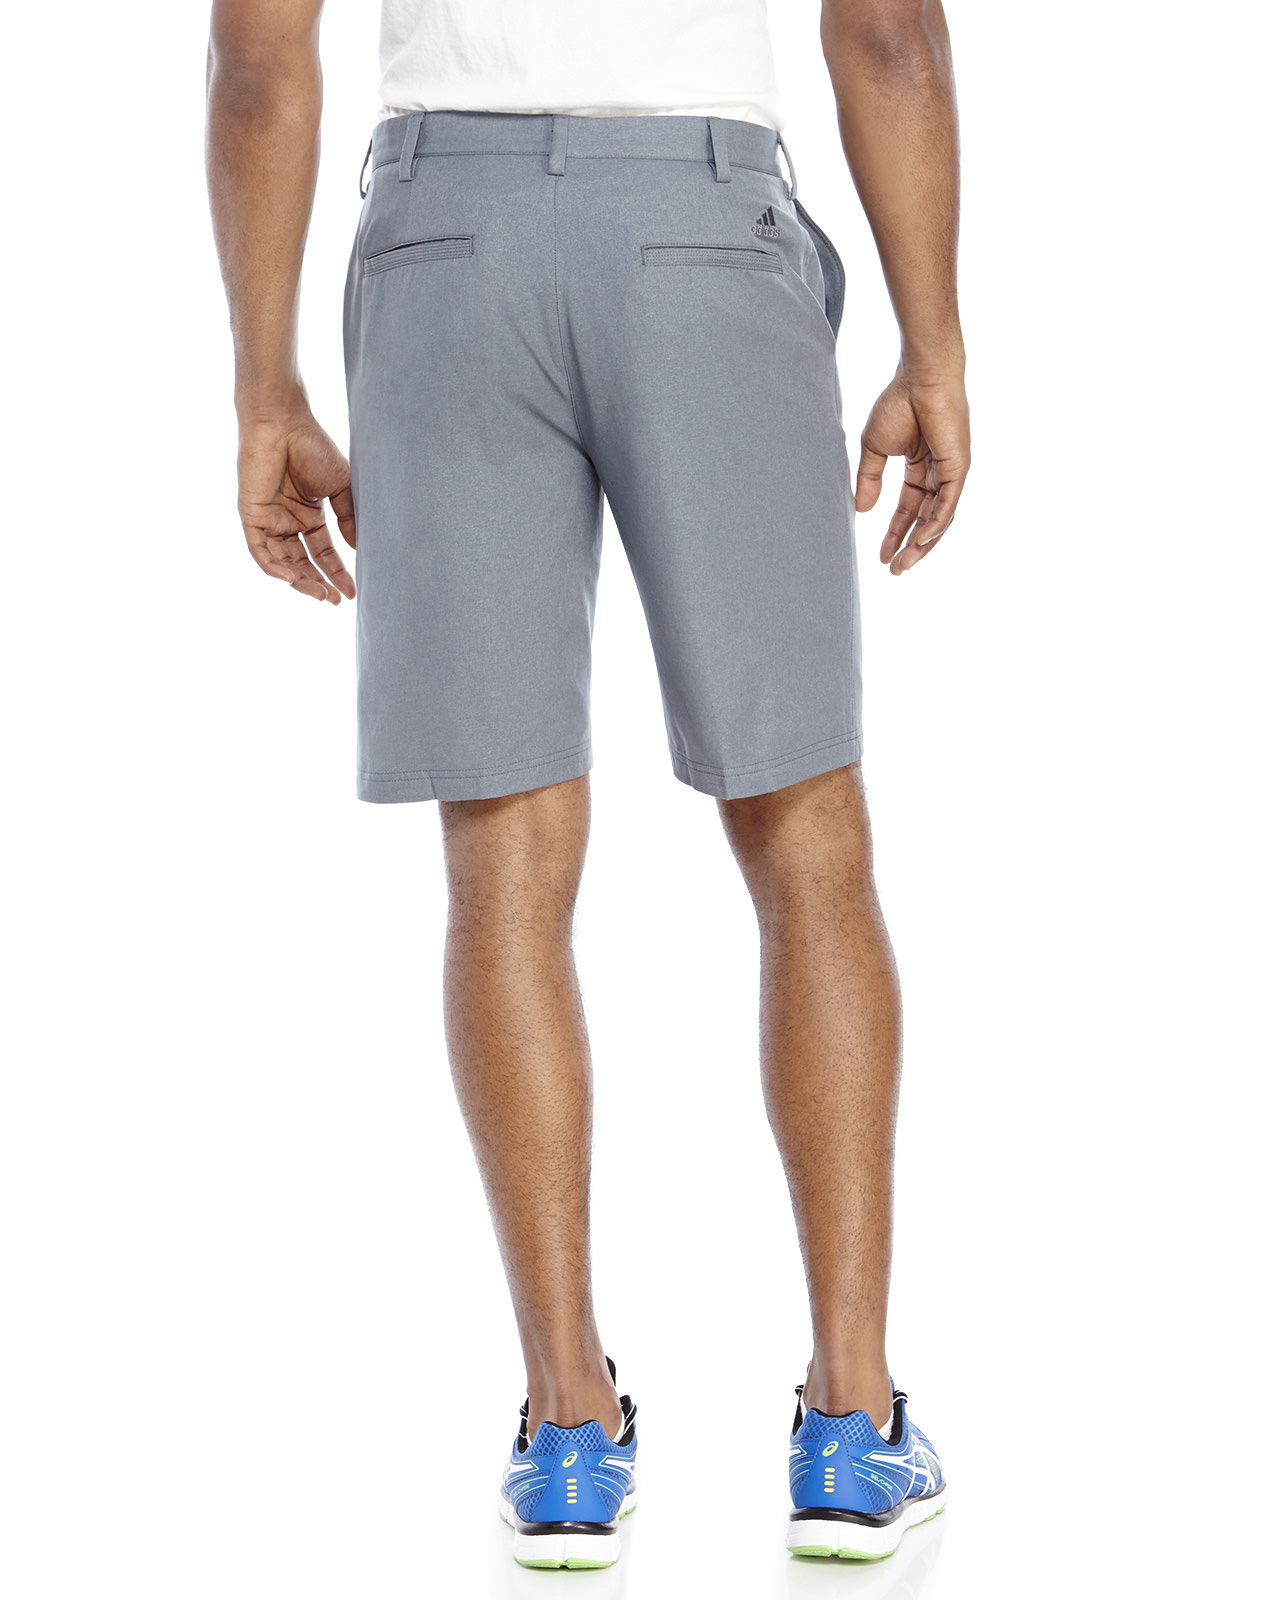 Lyst - Adidas Grey Flat Front Golf Shorts in Gray for Men